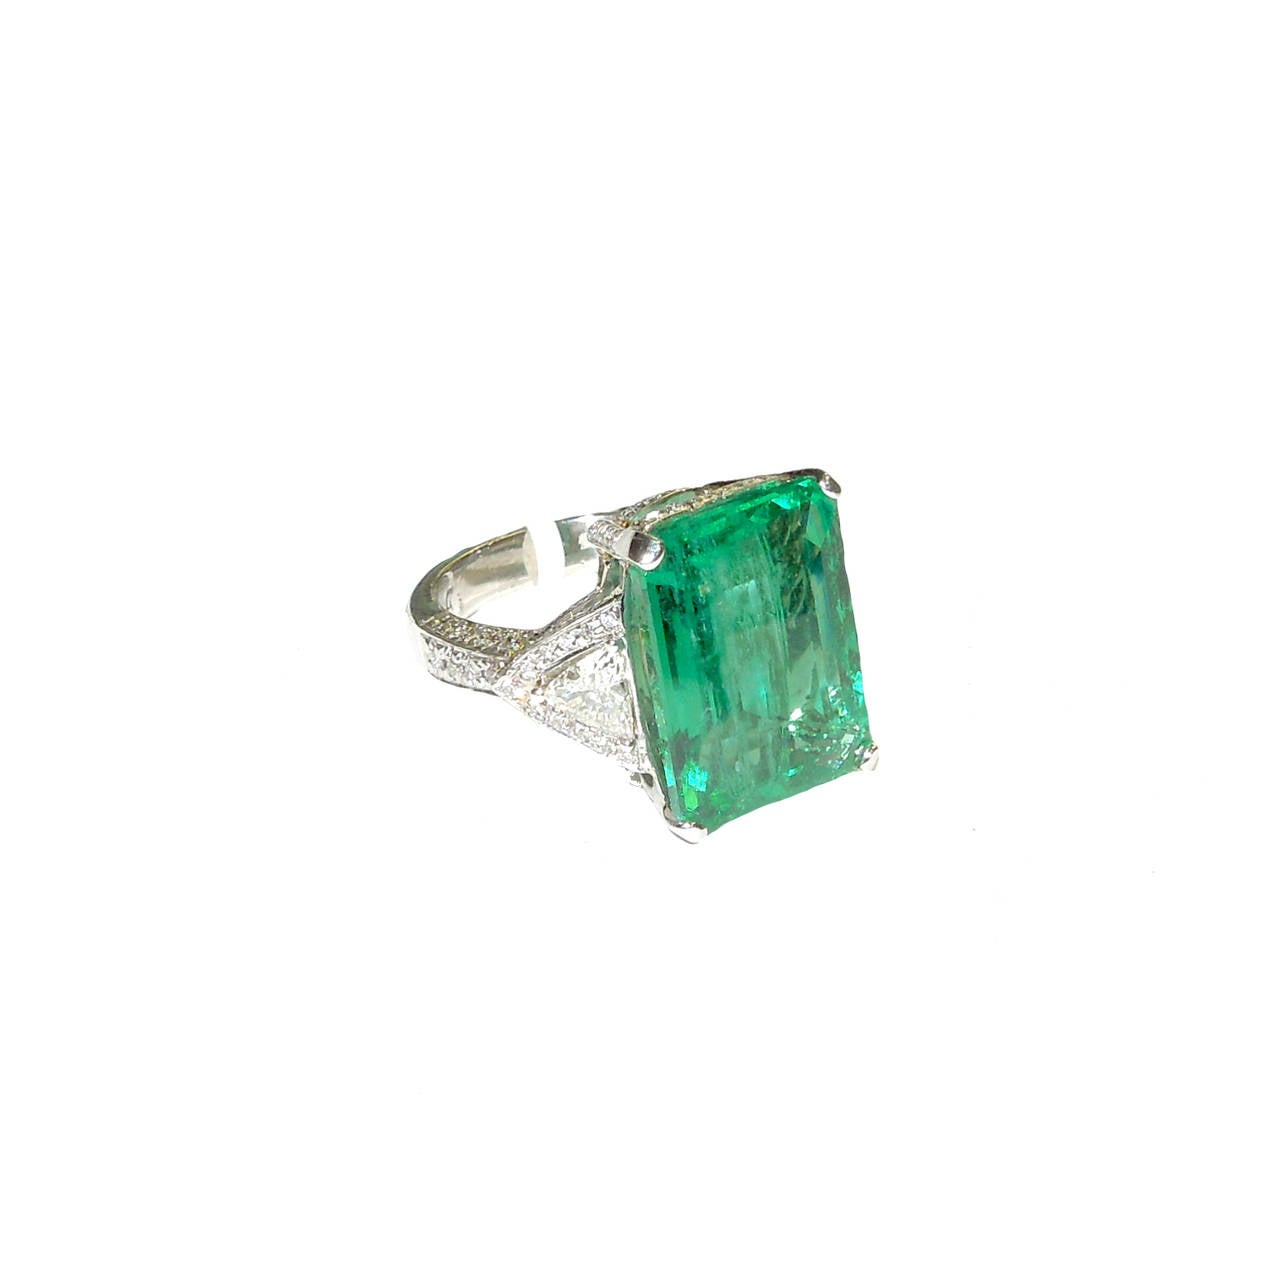 11.92 ct. Zambian Emerald Ring

2- H Color, VS Quality Trillion Diamonds 1.00 ct. (0.50 each)  

0.60 ct. round diamonds

Ring is made in Platinium.

Zambian Emerald comes with Certificate, very clean stone. 

Ring can be sized up or down,